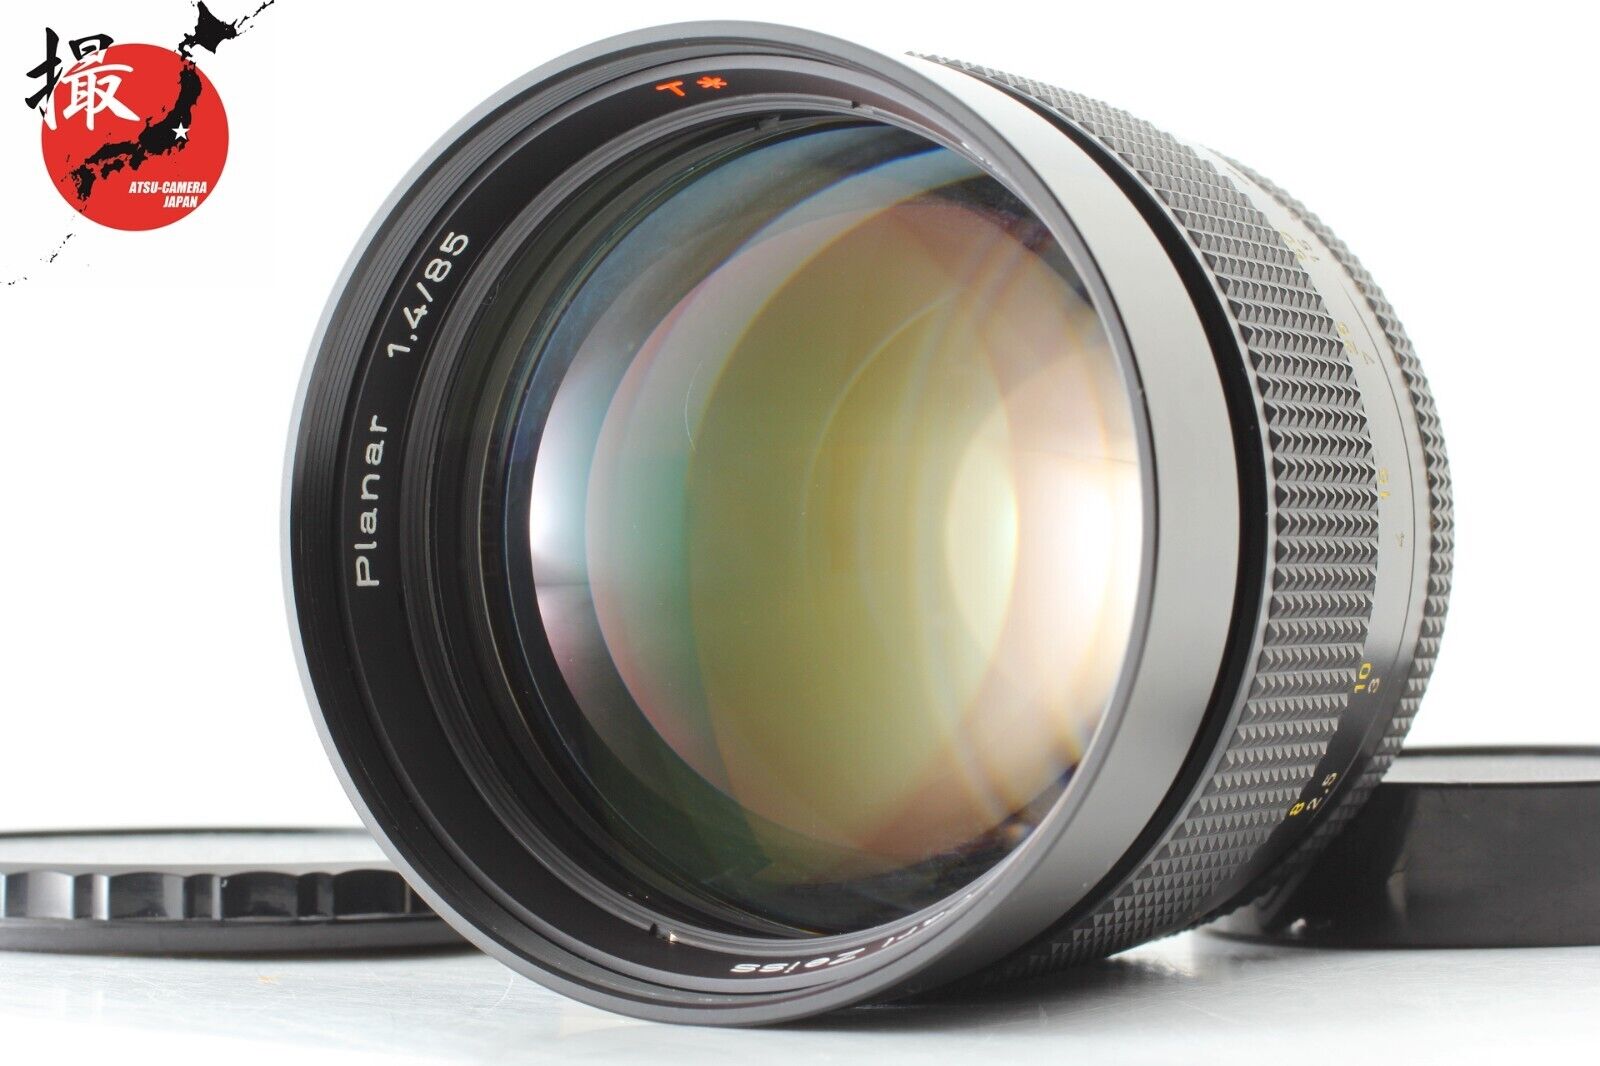 Contax ZEISS Planar T 85mm f/1.4 MF Lens For Zeiss for sale online 